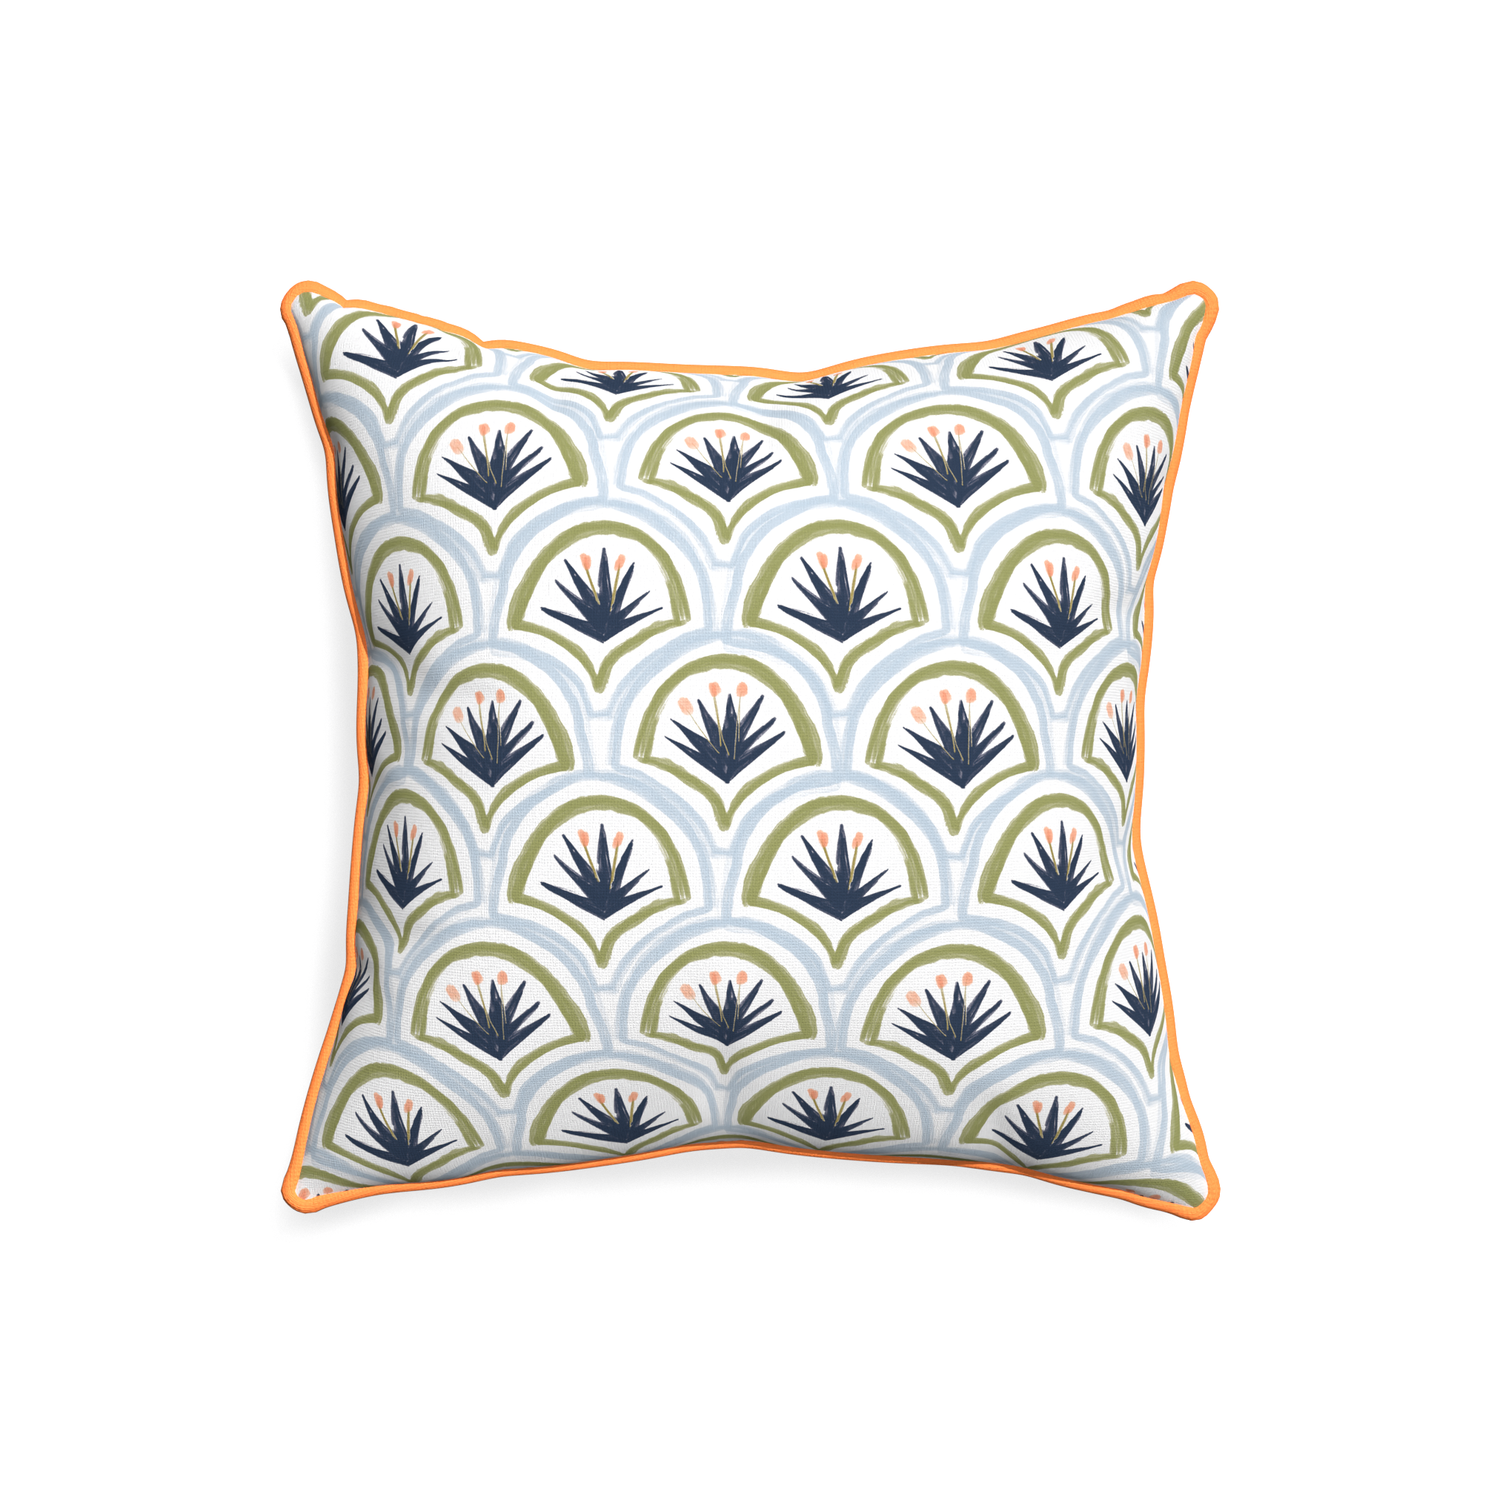 20-square thatcher midnight custom art deco palm patternpillow with clementine piping on white background